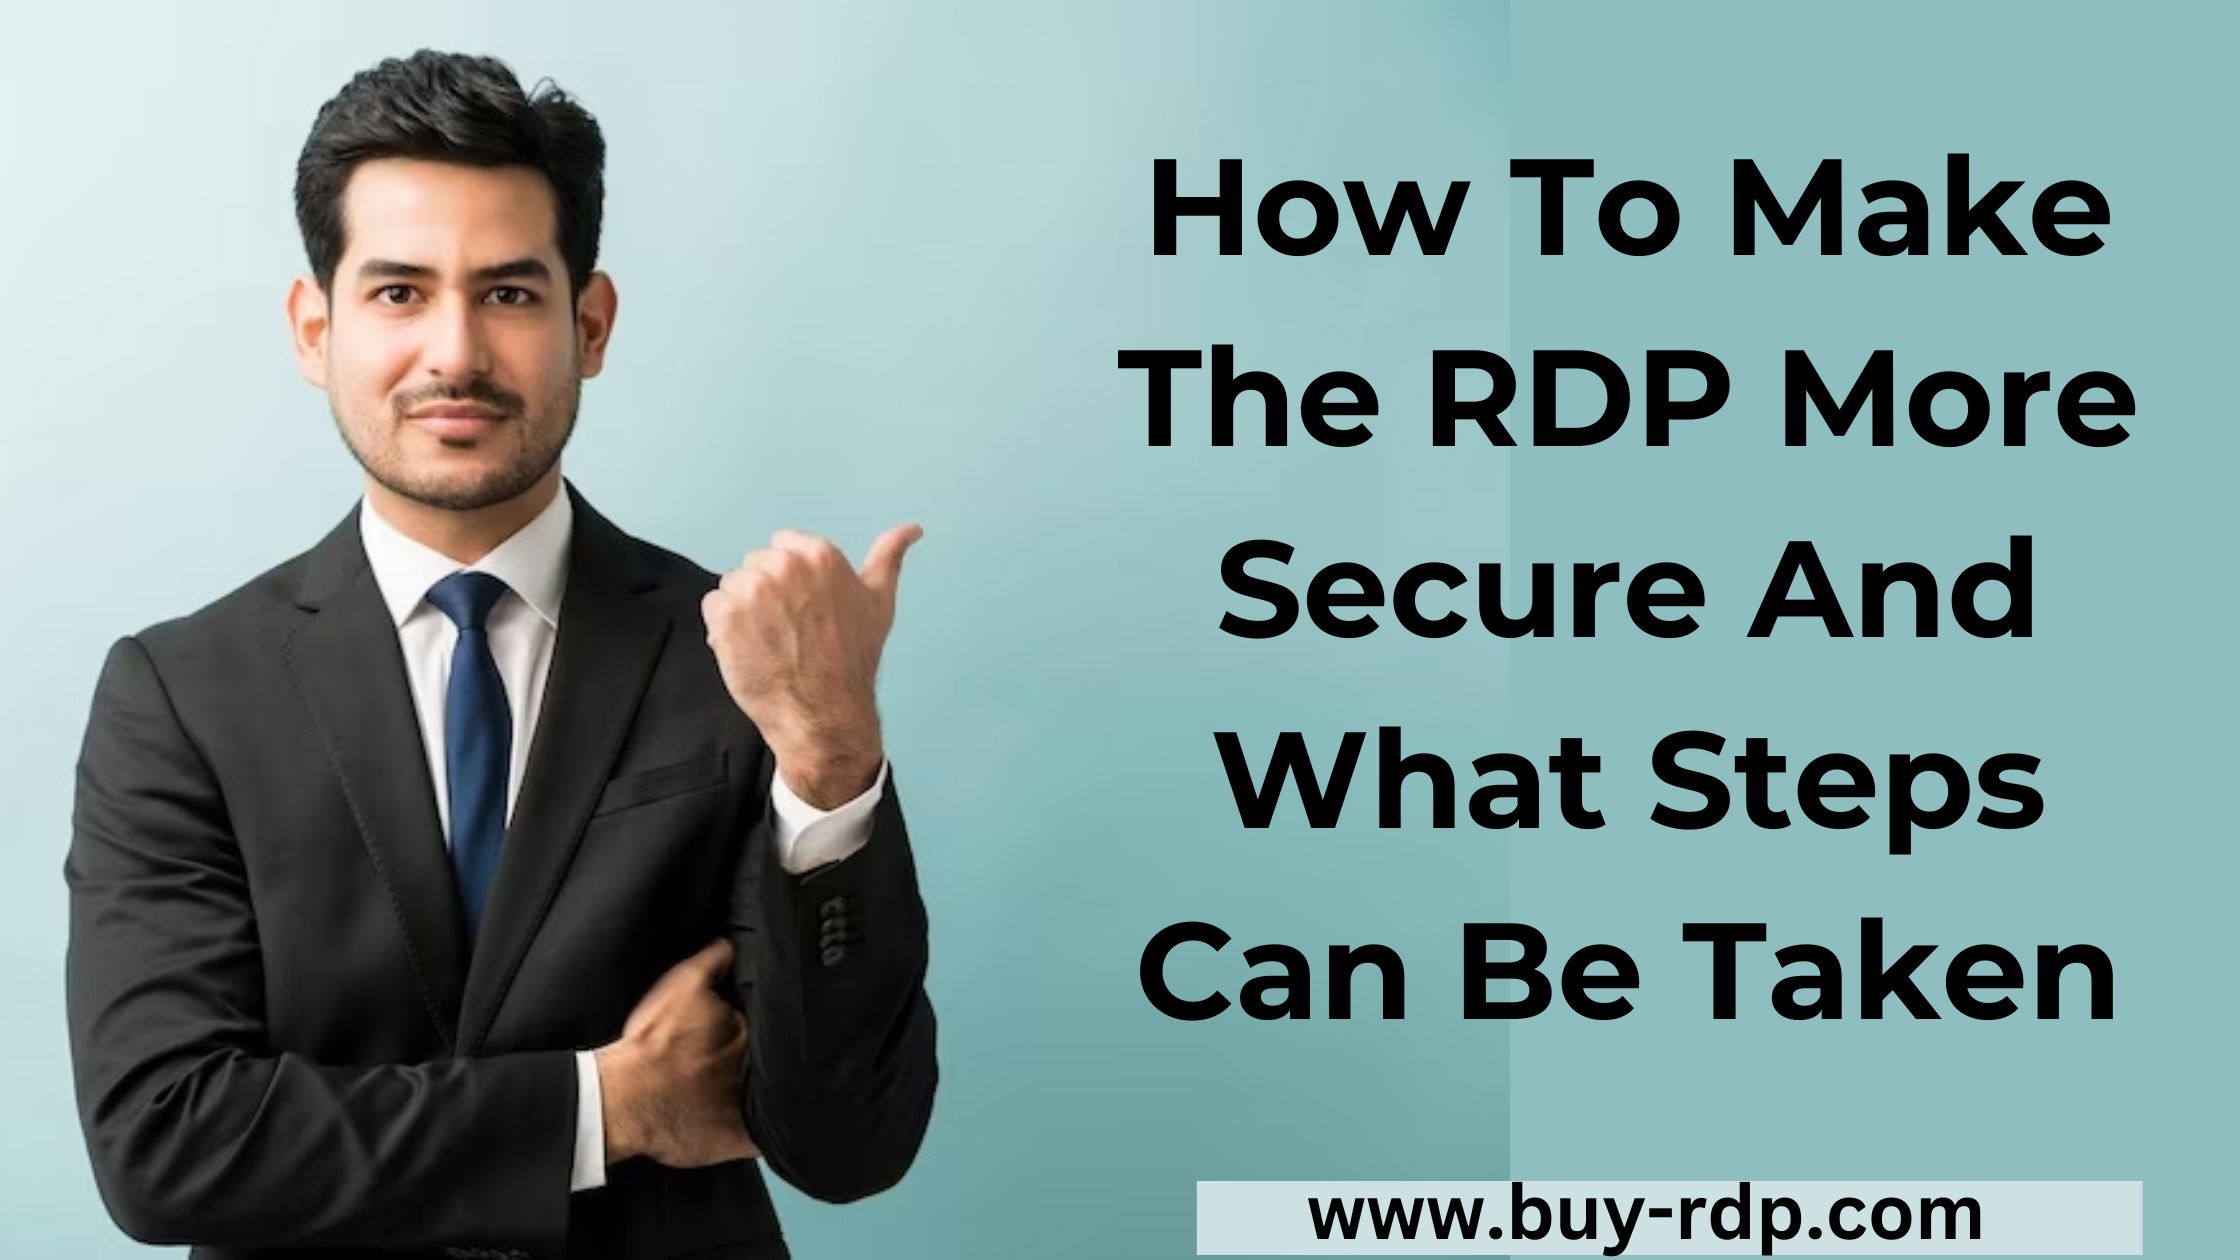 How To Make The RDP More Secure And What Steps Can Be Taken 